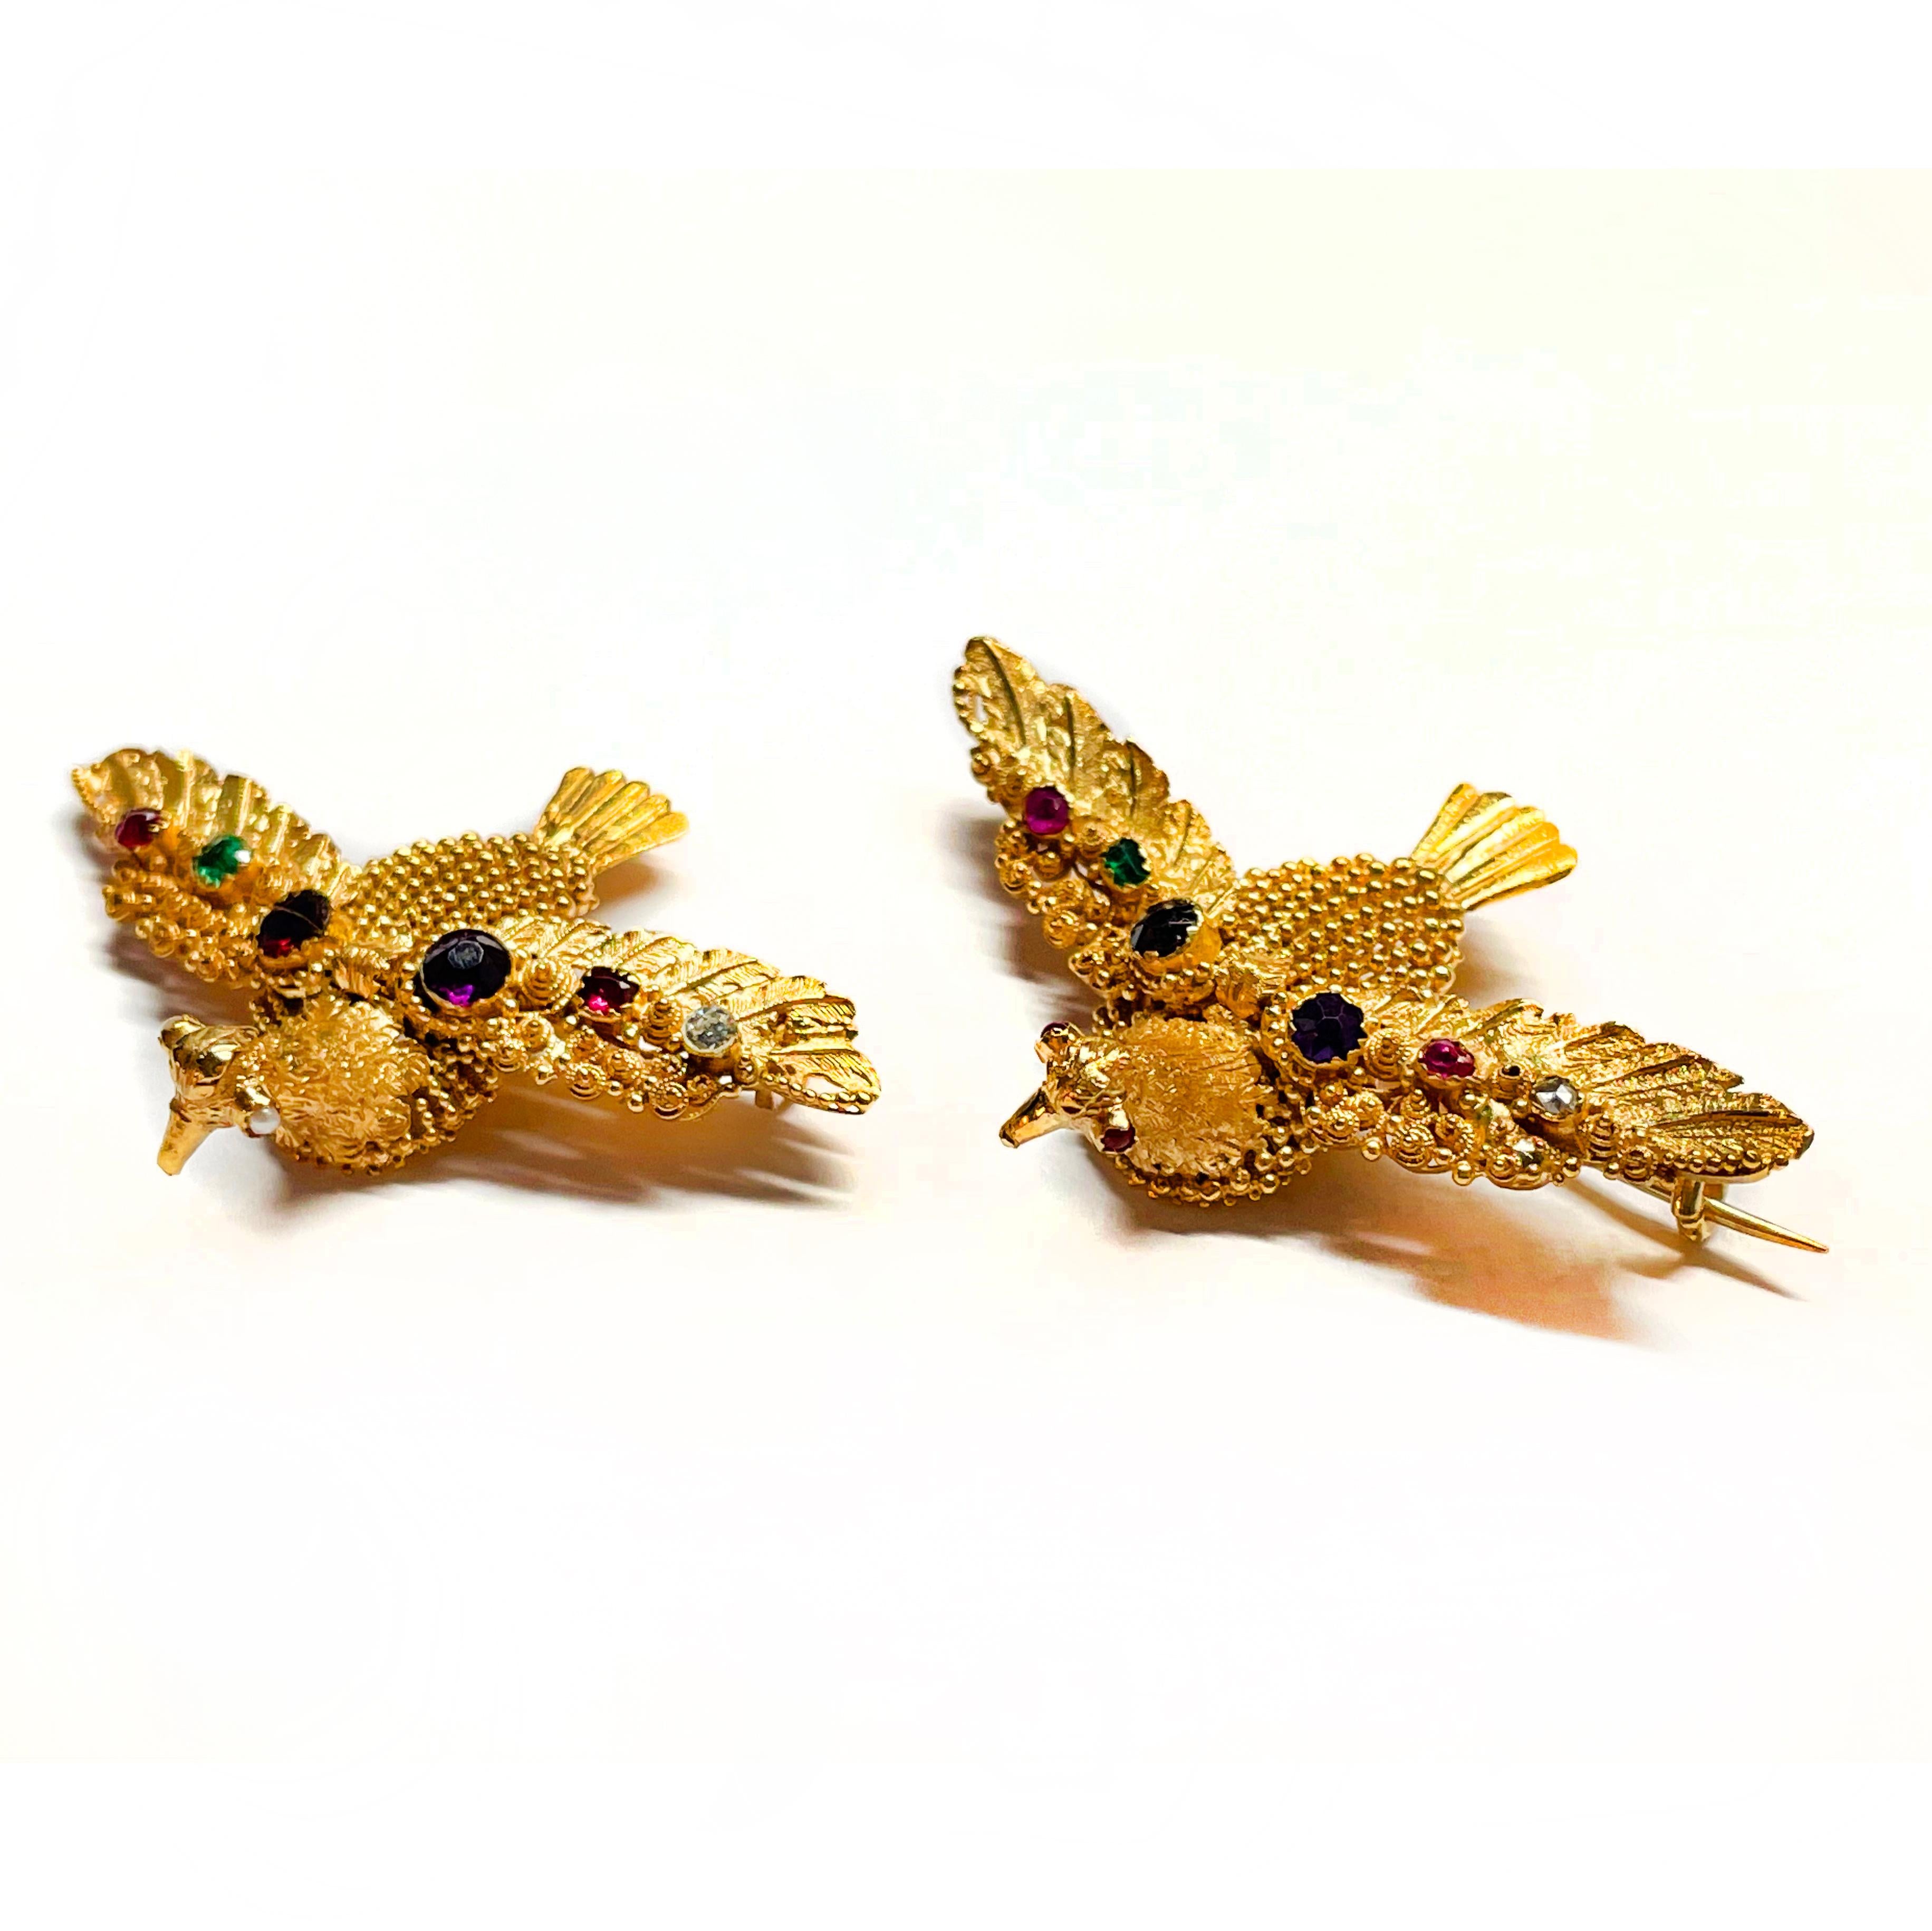 Rare Pair of Georgian REGARD Turtle Dove Brooches, ca. 1820s

A symbolic and museum-collectable example of acrostic jewels, featuring two doves, mounted with various gemstones, where the gems spell out 